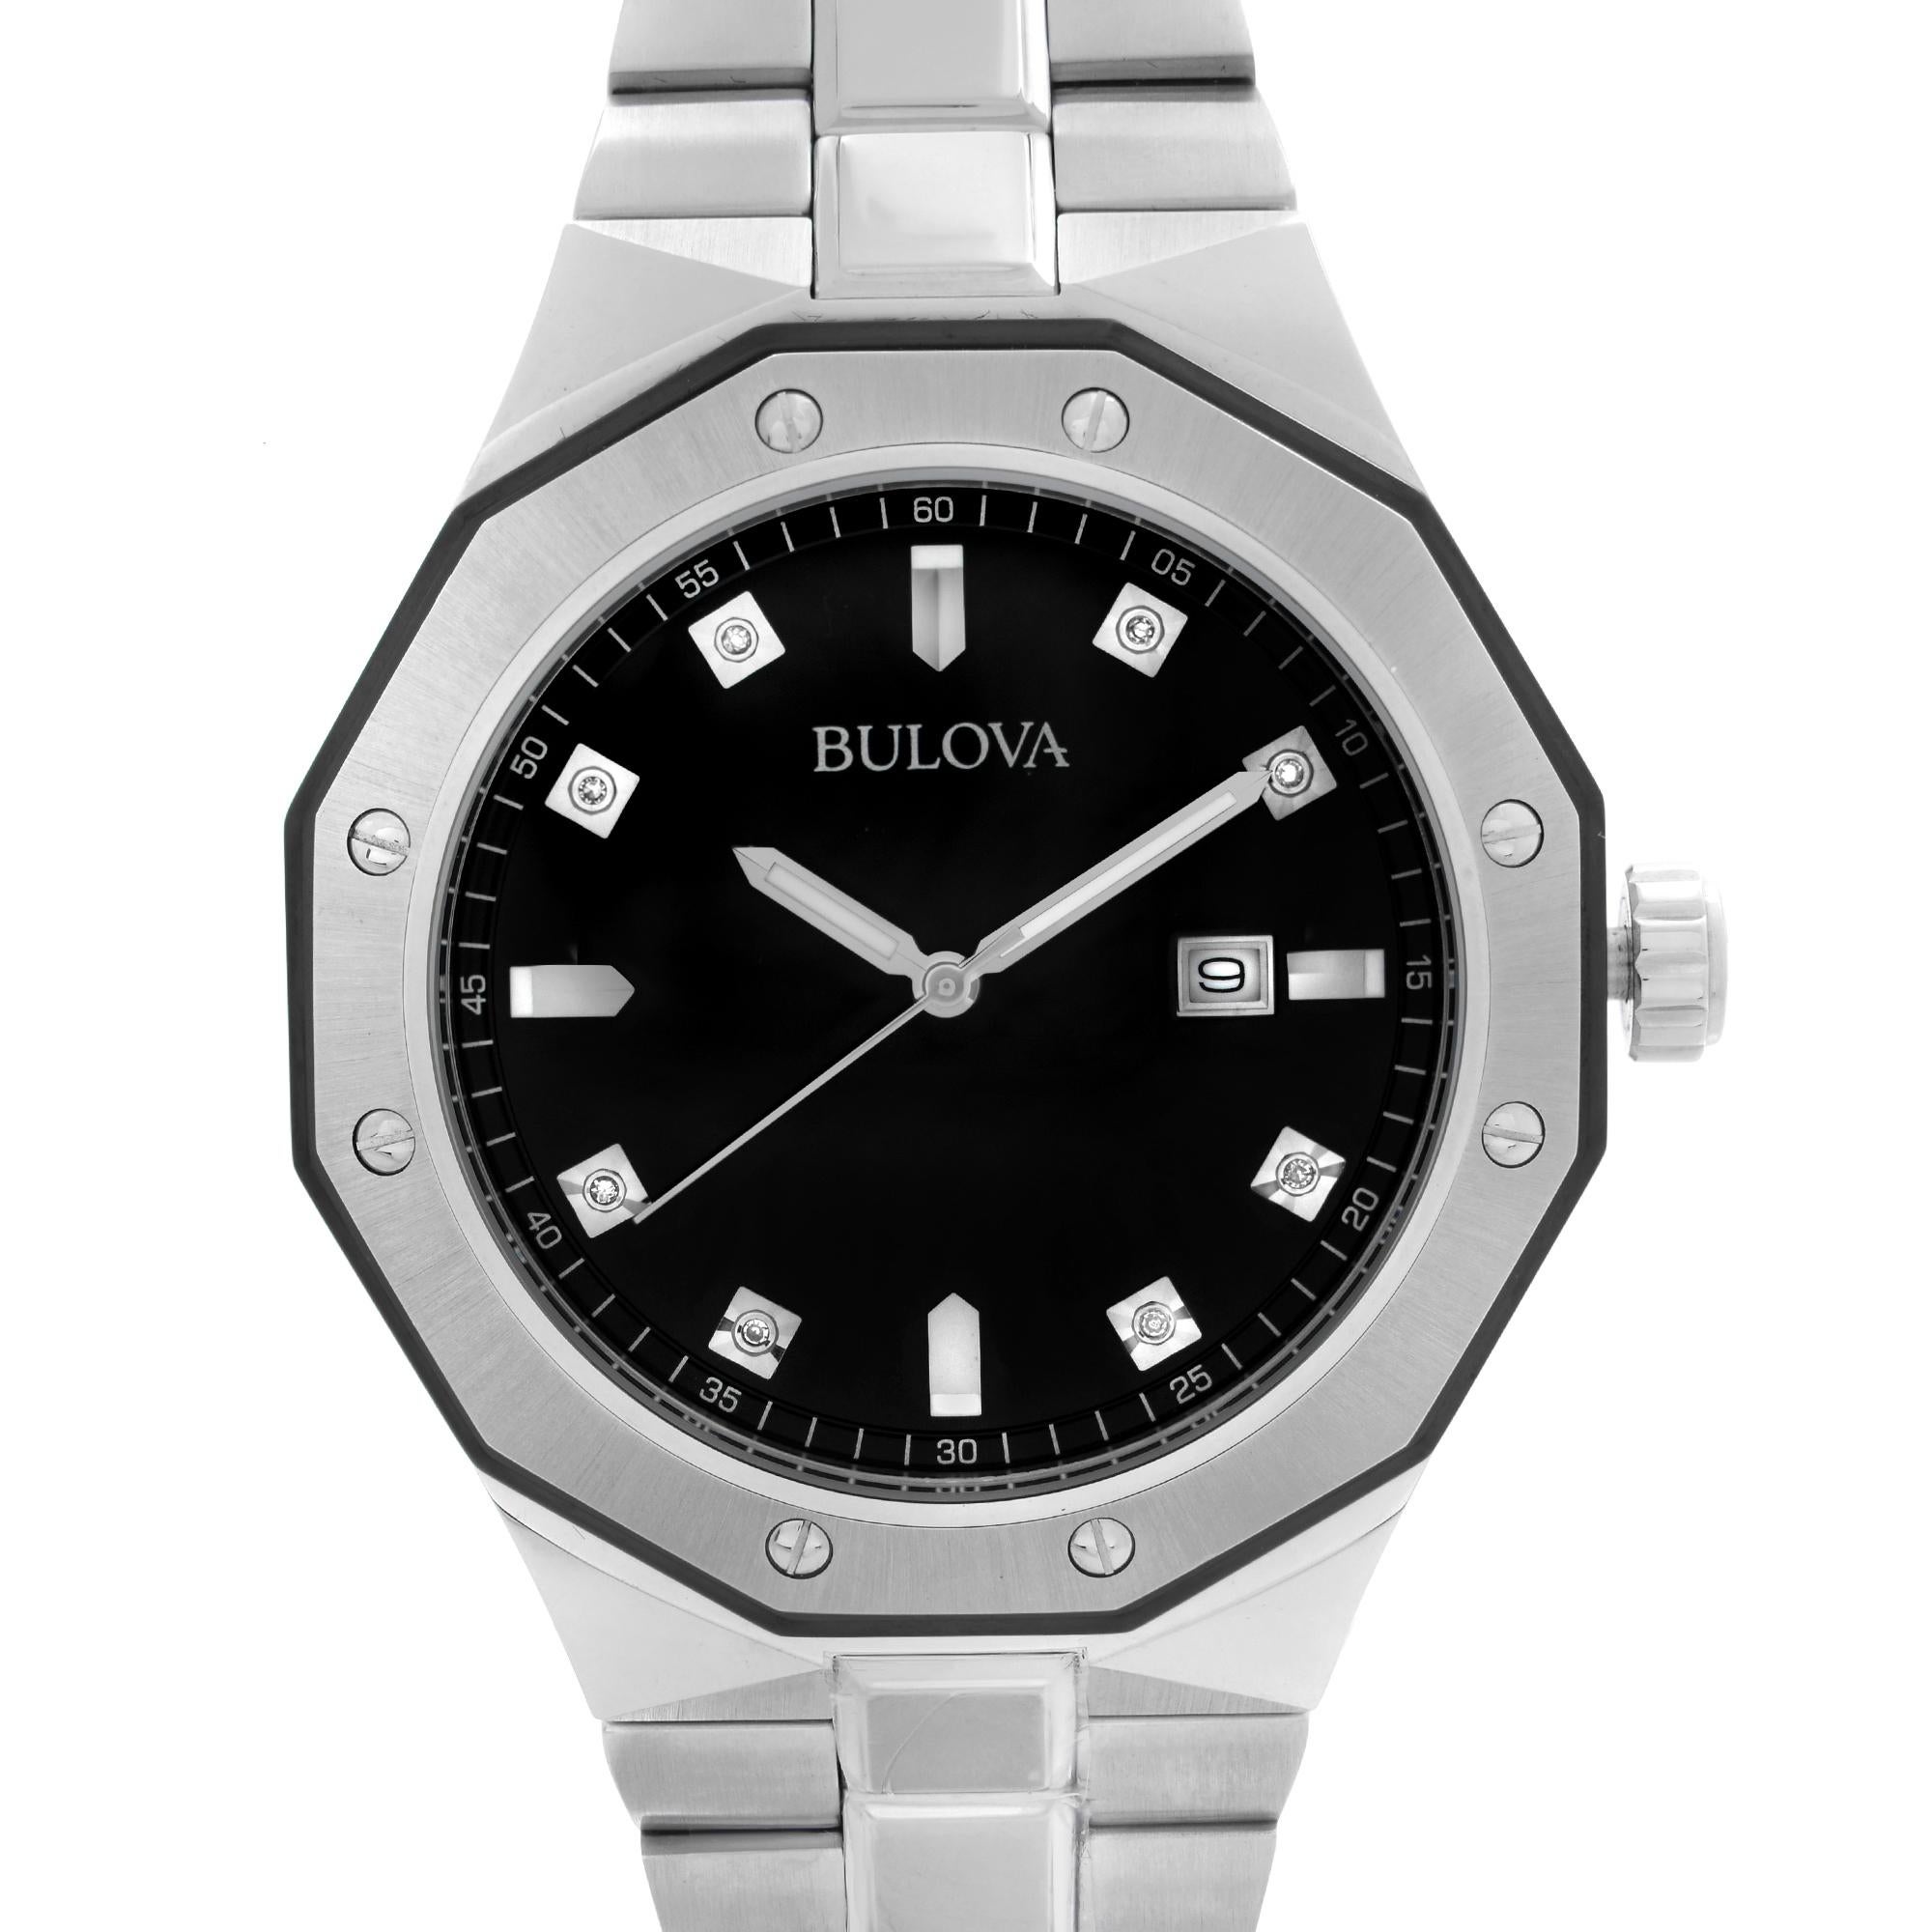 Unworn Bulova Classic Diamond Quartz Watch 98D103. This Beautiful Timepiece Features: Polished Stainless Steel Case and Bracelet. Fixed Steel Bezel. Black Dial with Silver-Tone Luminous Hands and Diamond Hour Markers. Date Indicator is at 3 O'Clock